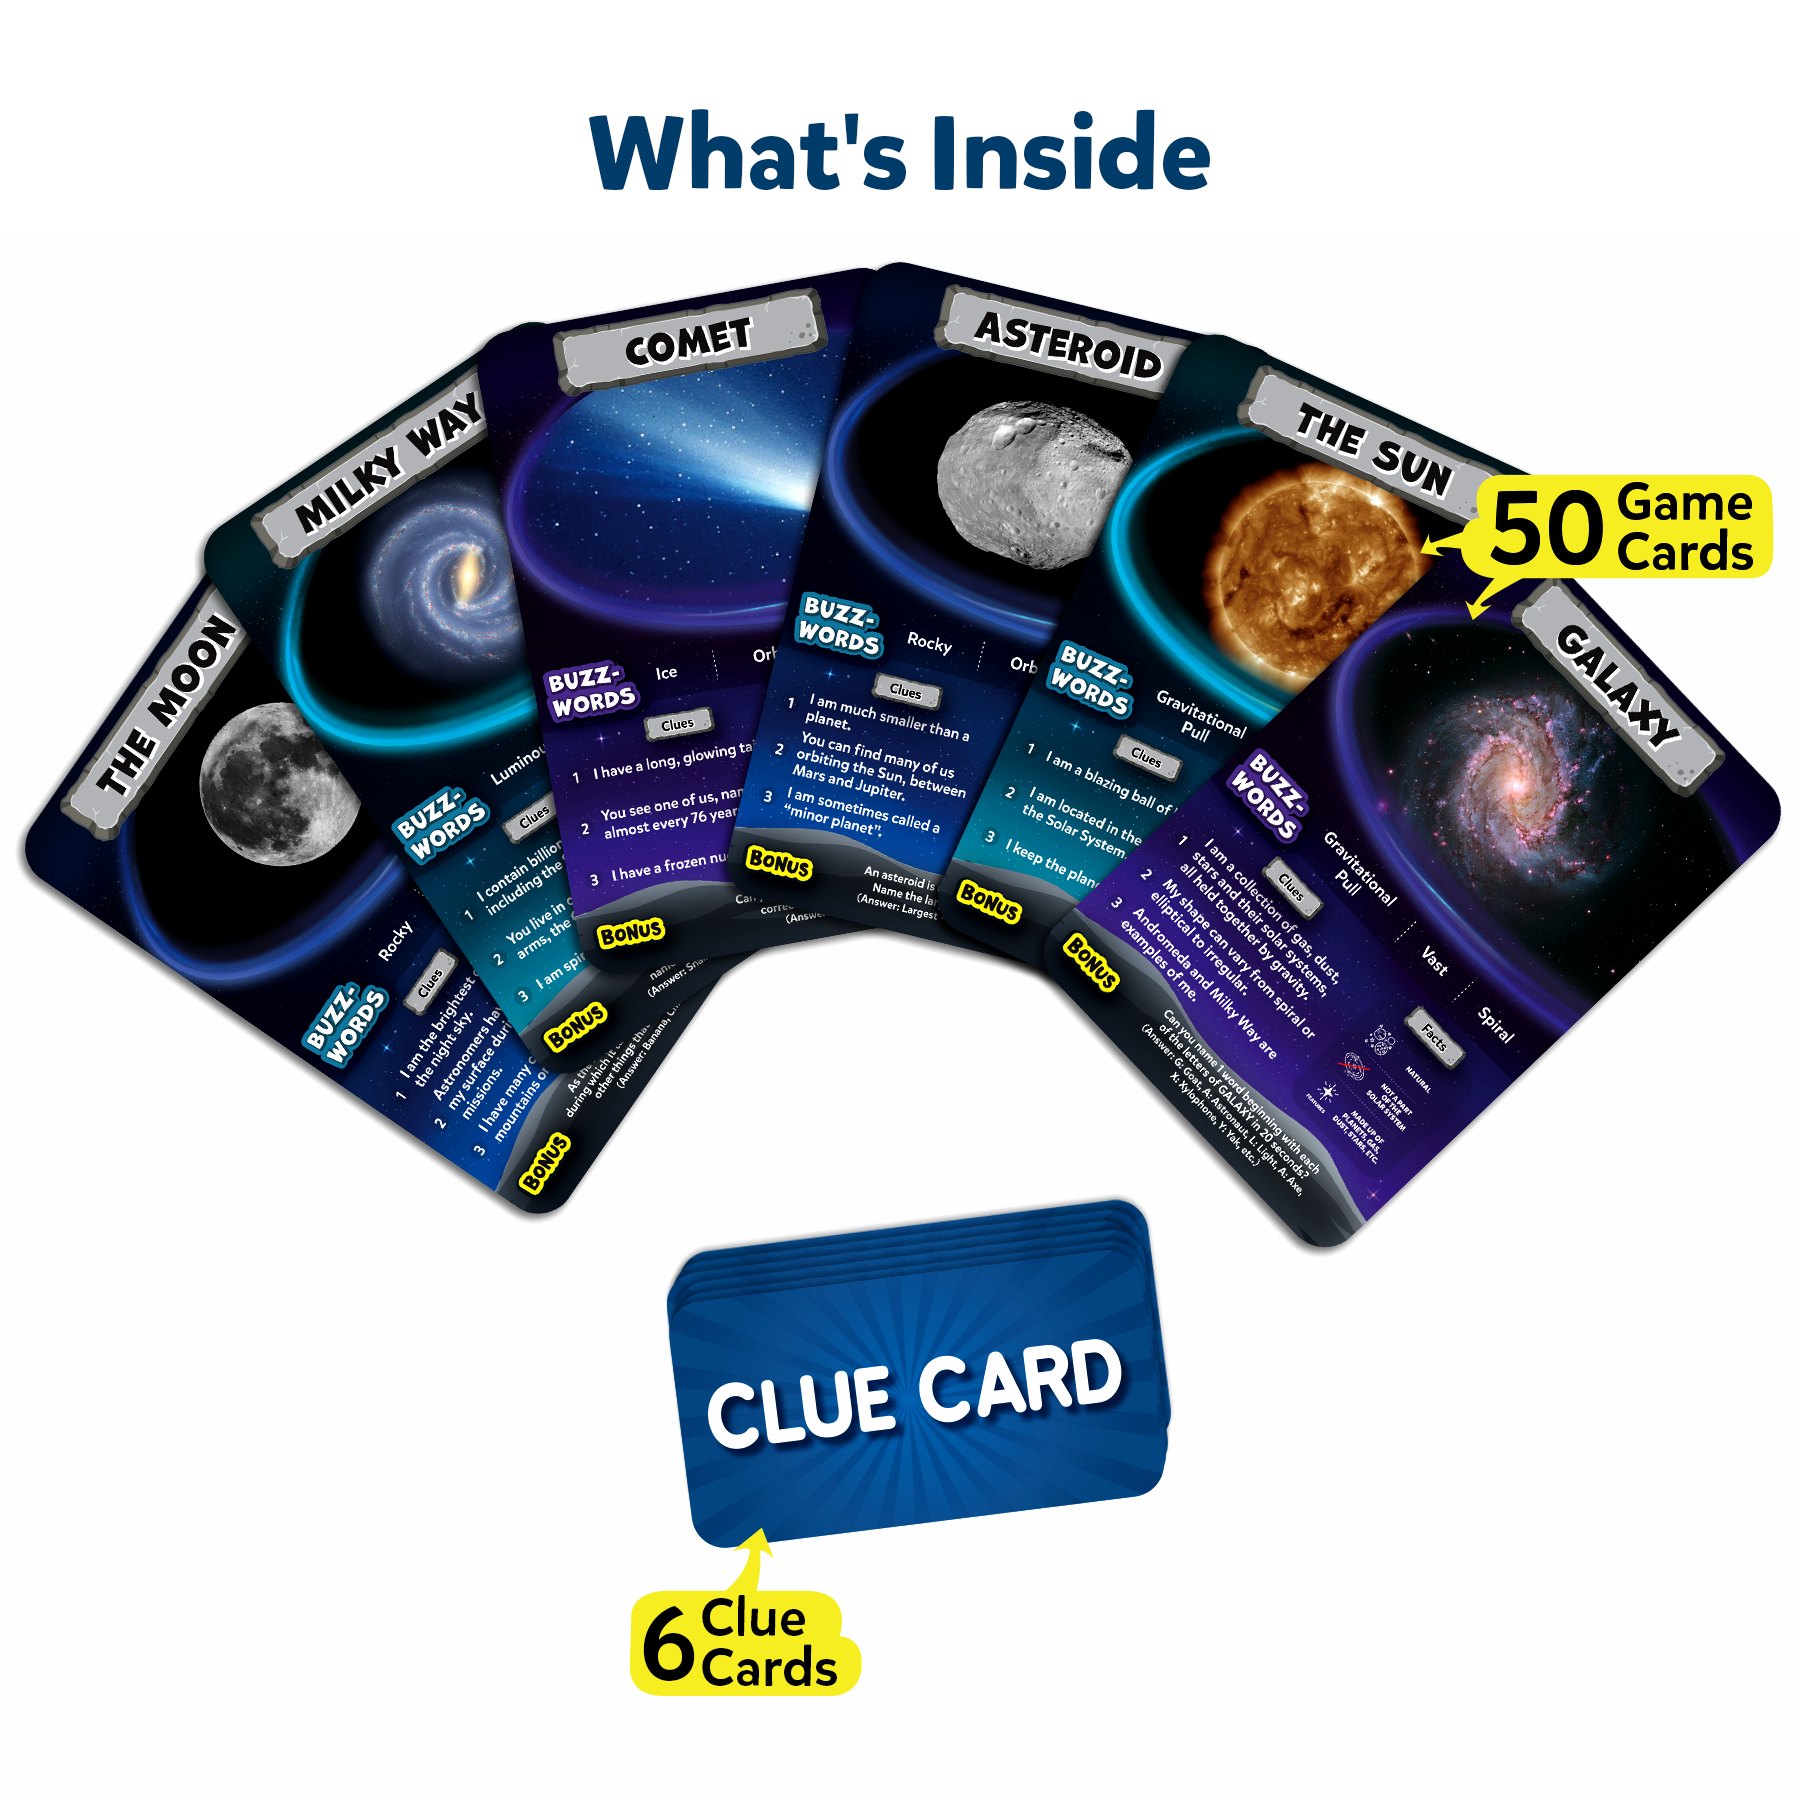 Skillmatics Card Game - Guess in 10 Space, Perfect for Boys, Girls, Kids & Families Who Love Educational Toys, Gifts for Ages 8, 9, 10 and Up